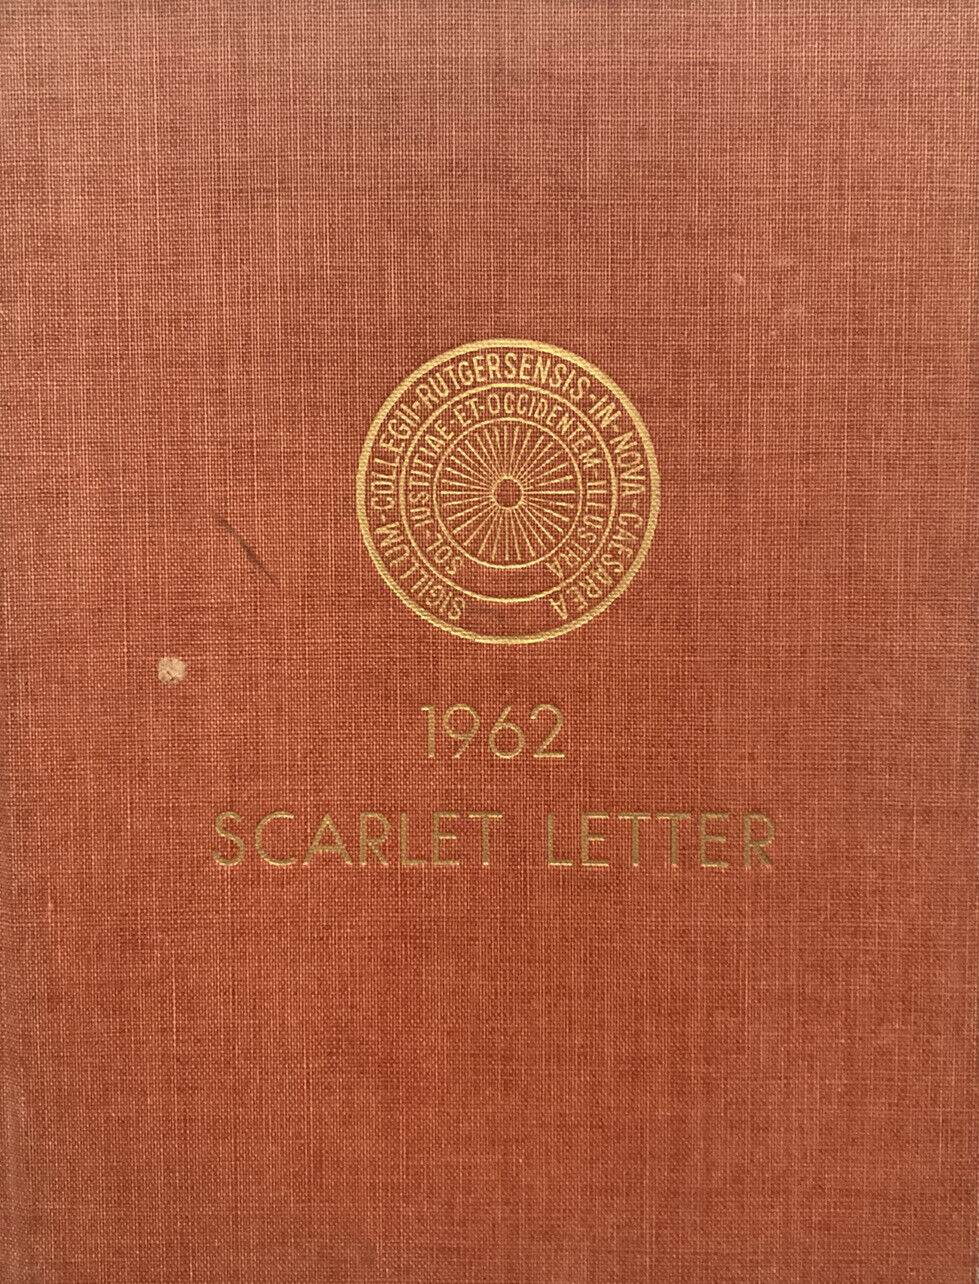 1962 Rutgers University Scarlet Letter Yearbook New Brunswick￼ New Jersey